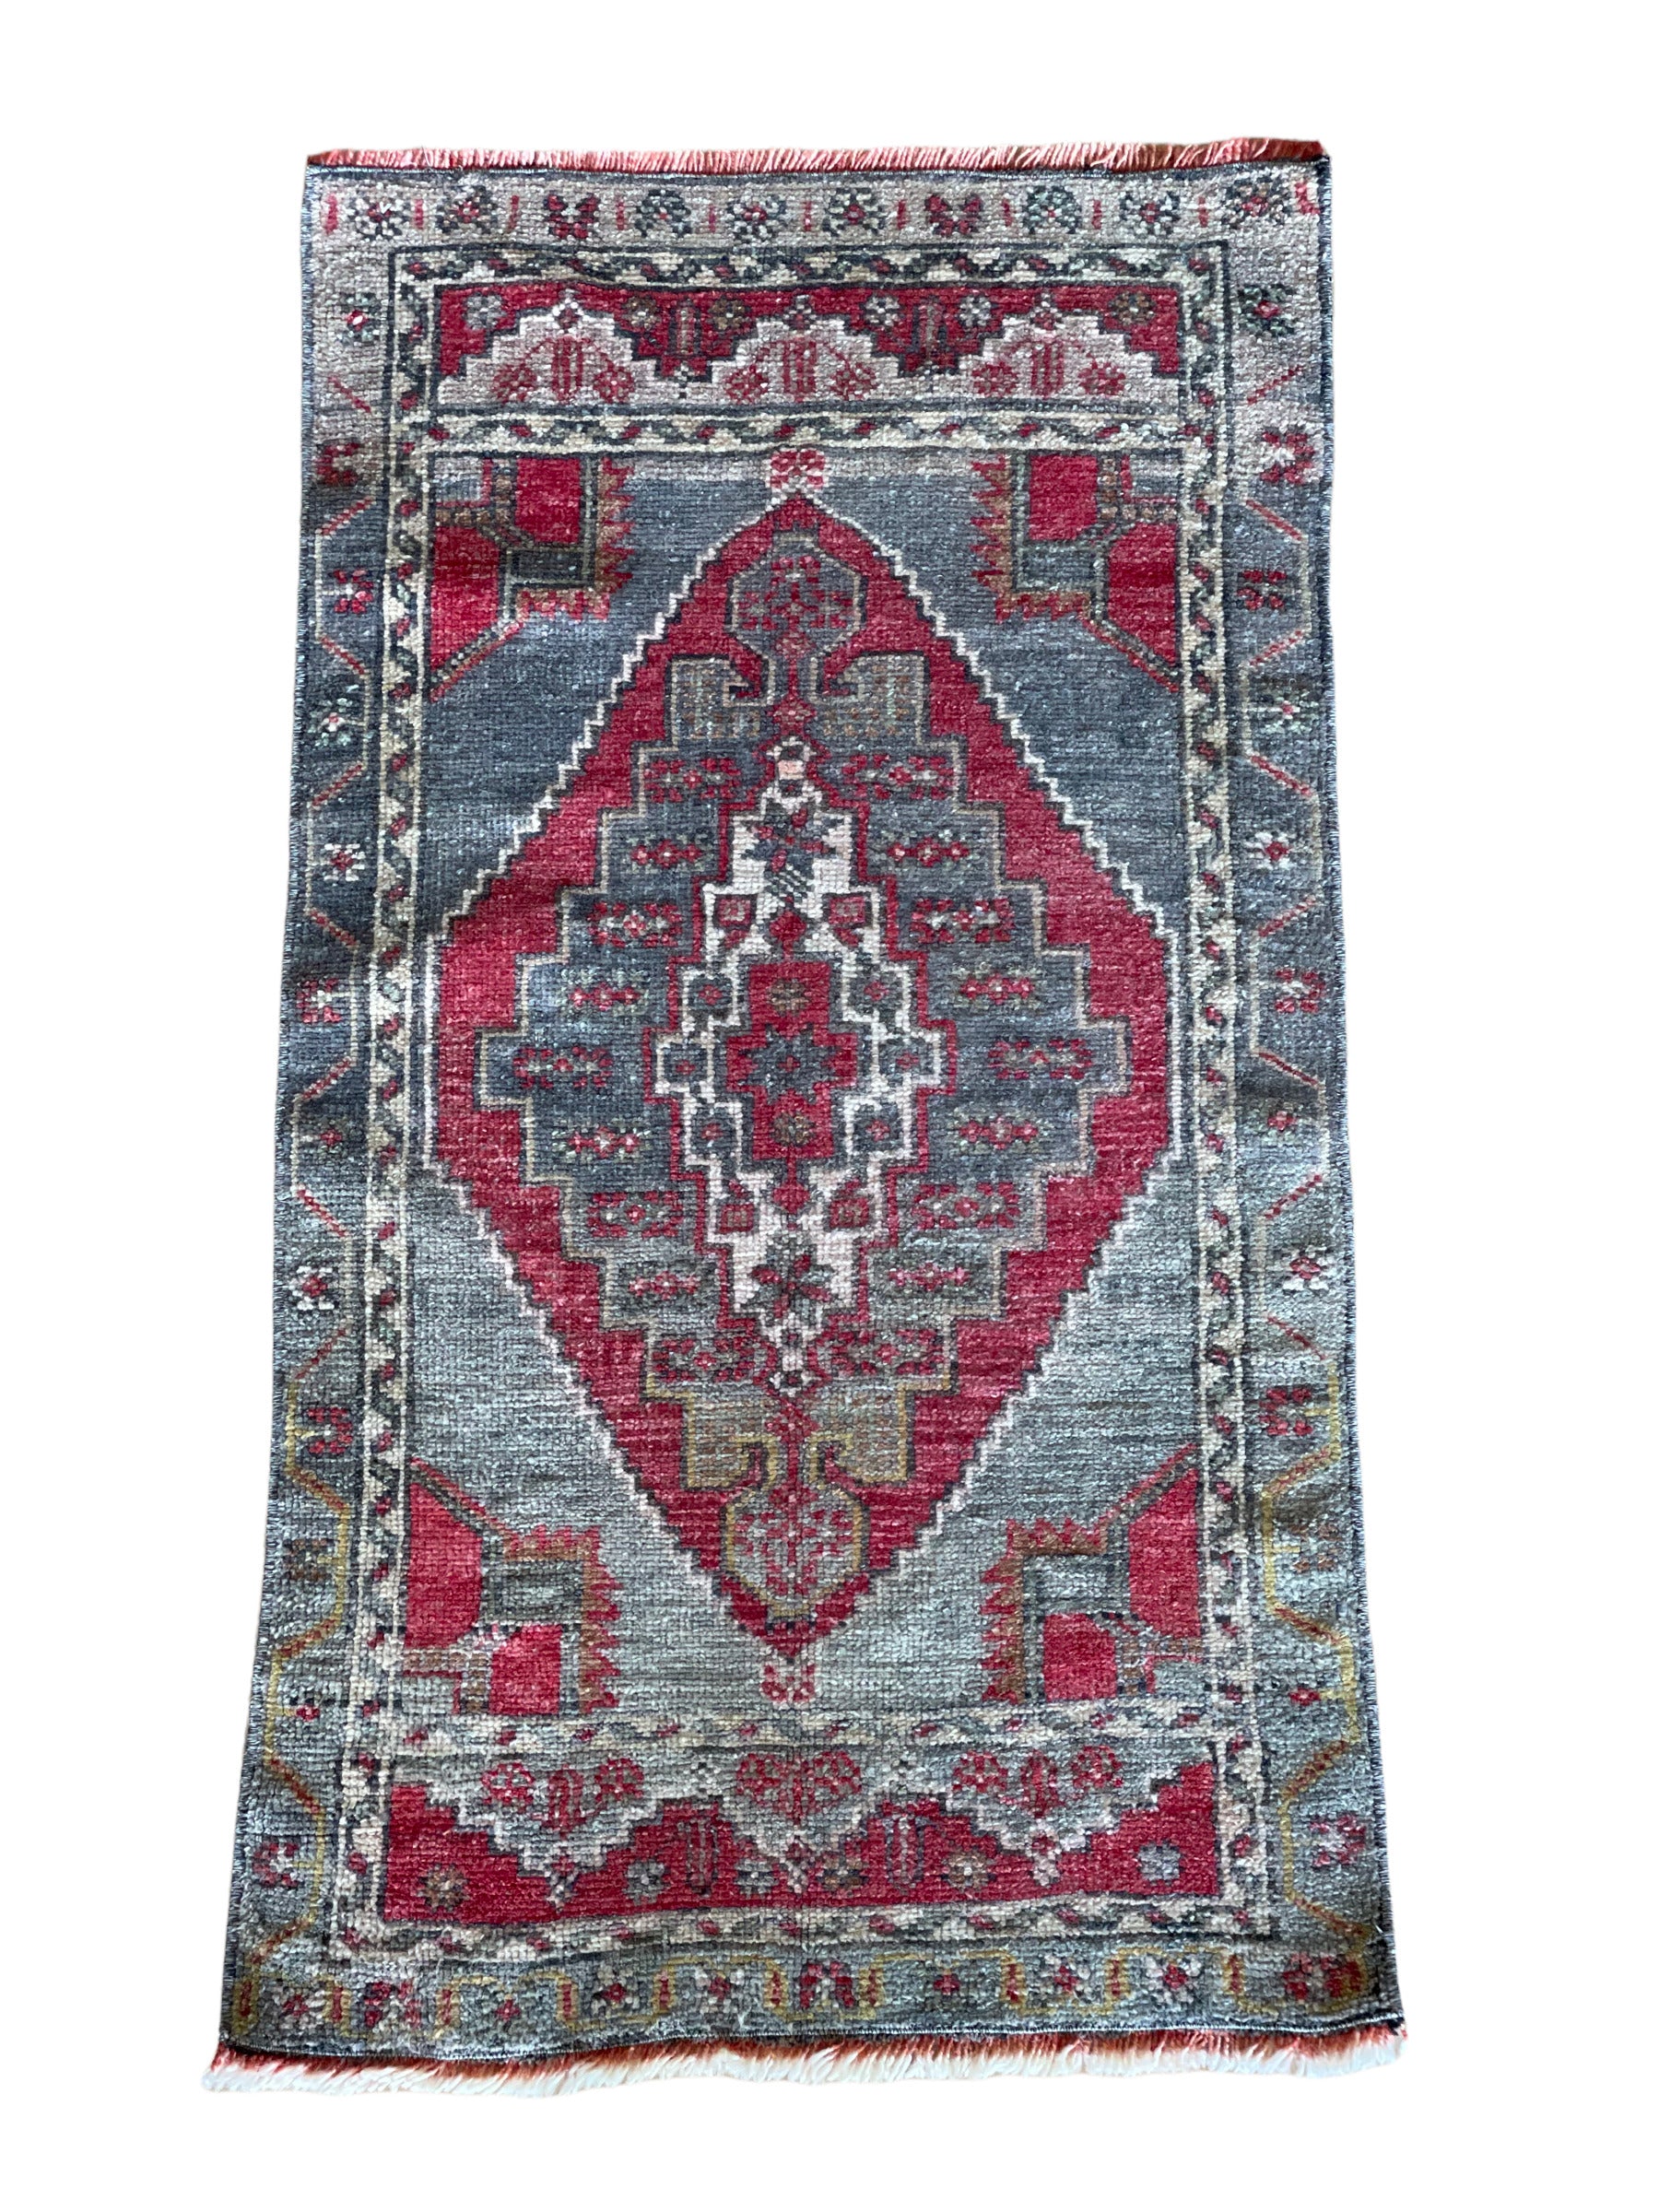 Semi-Antique wool hand knotted rug with red and grey coloring.